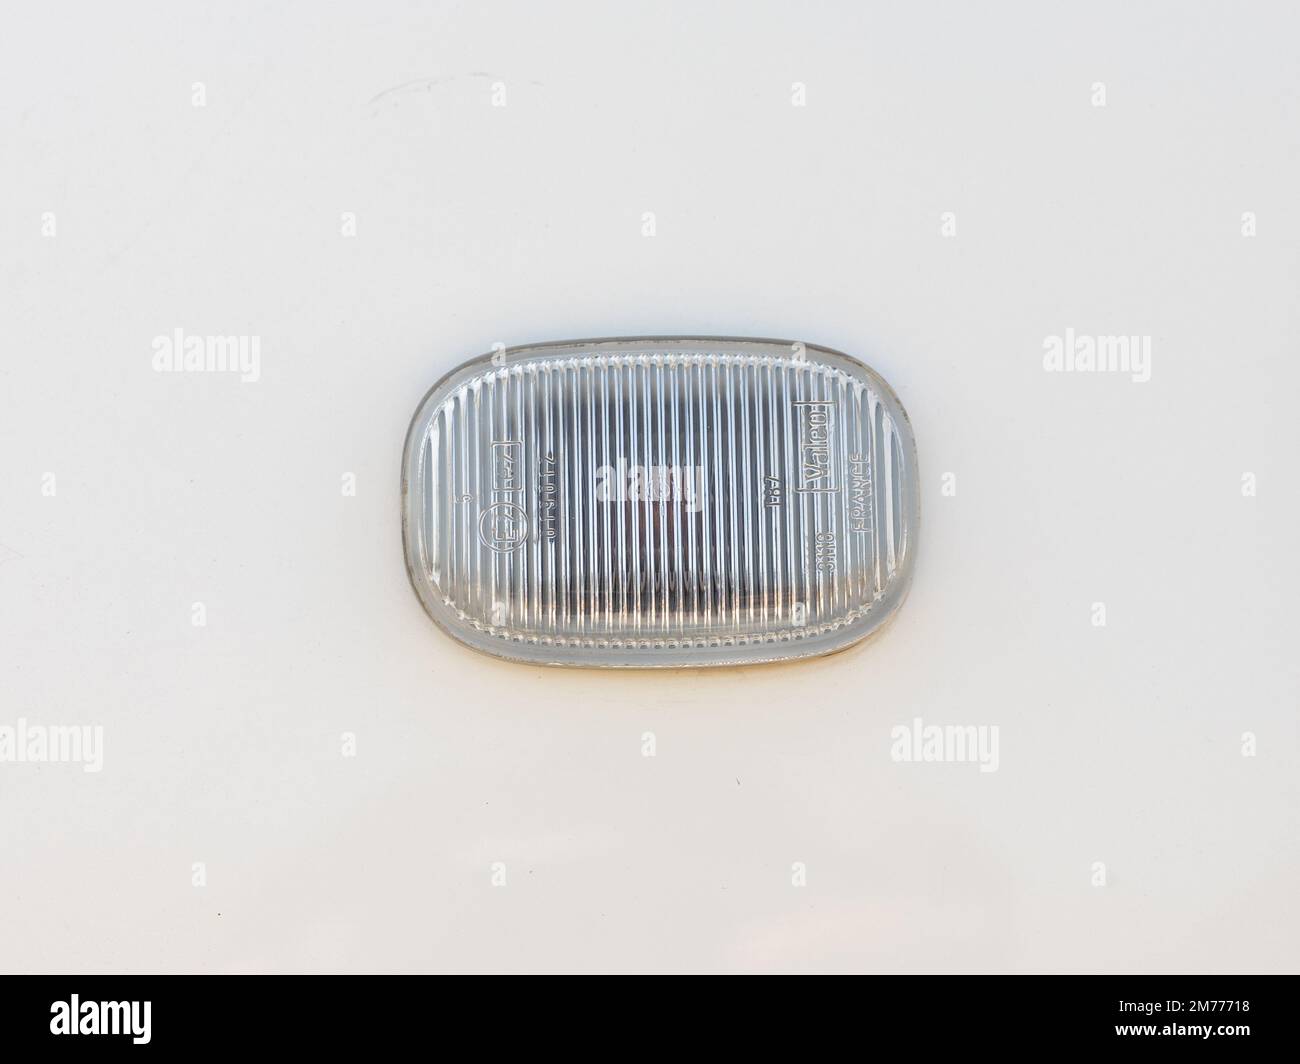 Swat, Pakistan - December 26, 2022 : Valeo side indicator of a vehicle small turn signal lamp is side of body Car head Stock Photo